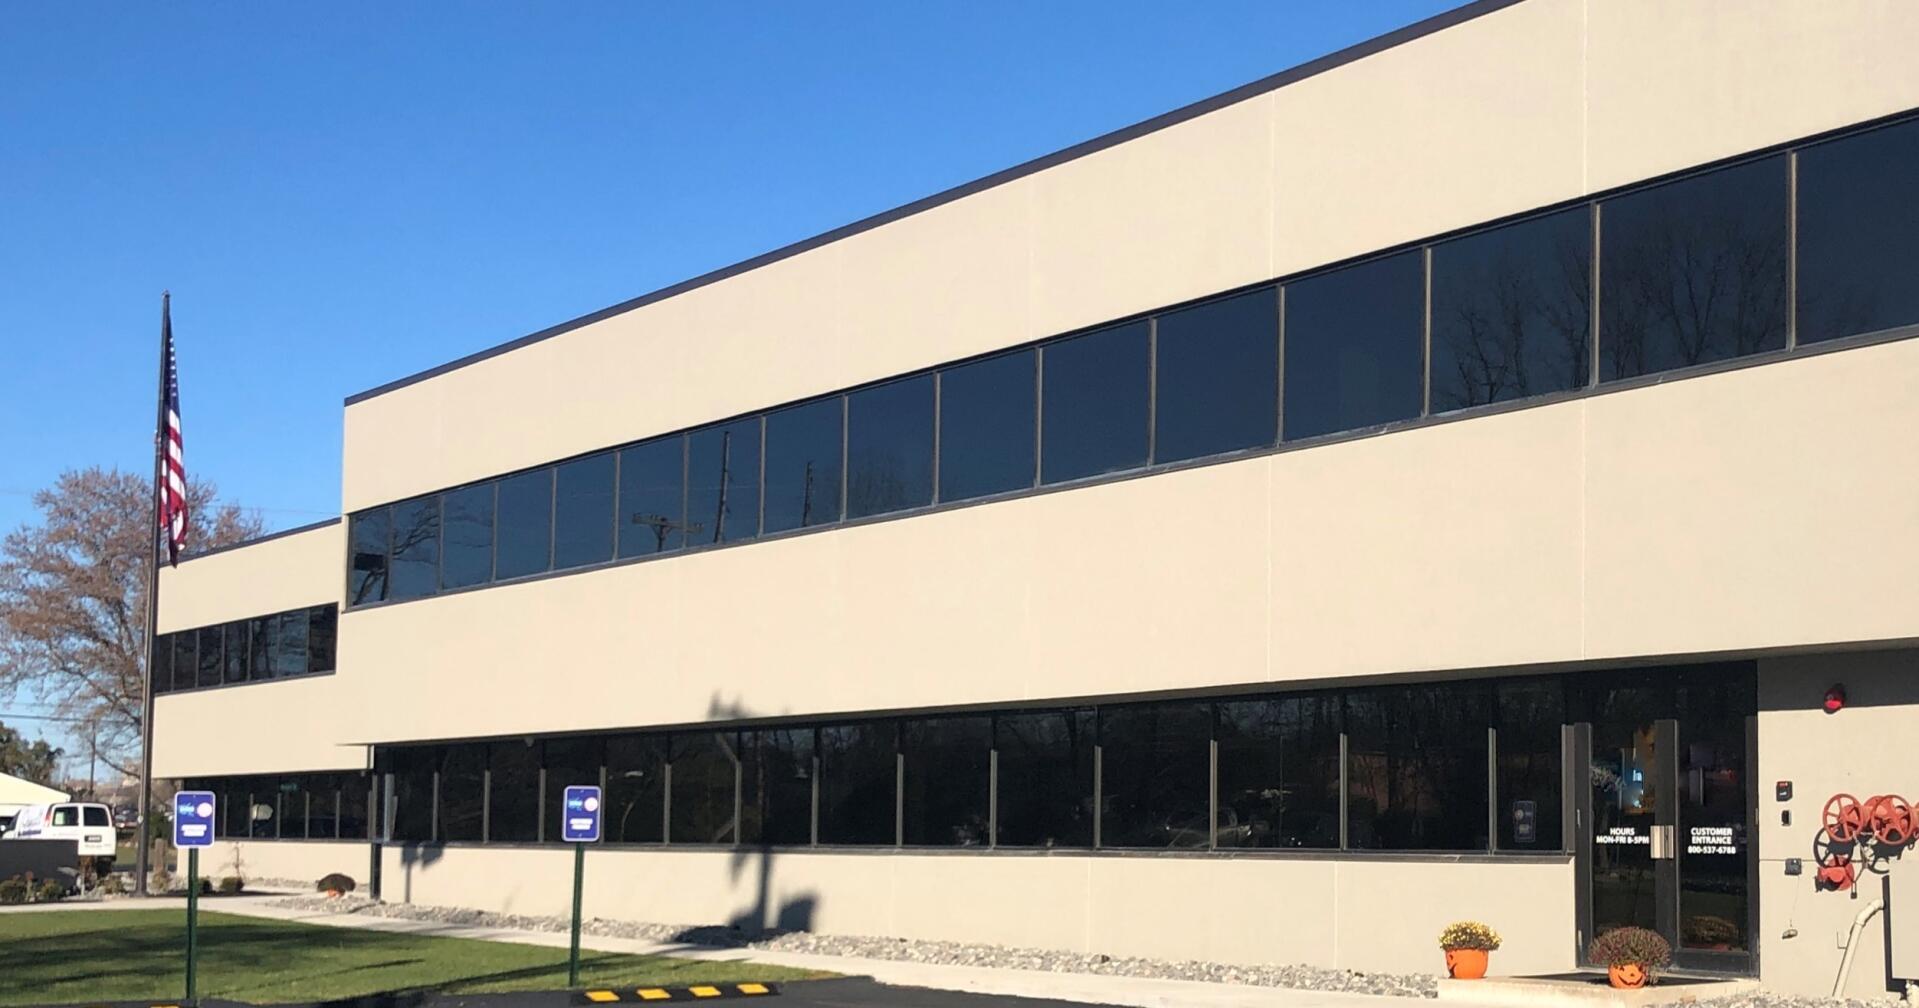 Alliance Innovations, LLC headquarters located in Mansfield, Ohio, a thermoforming, compression molding, and tooling business